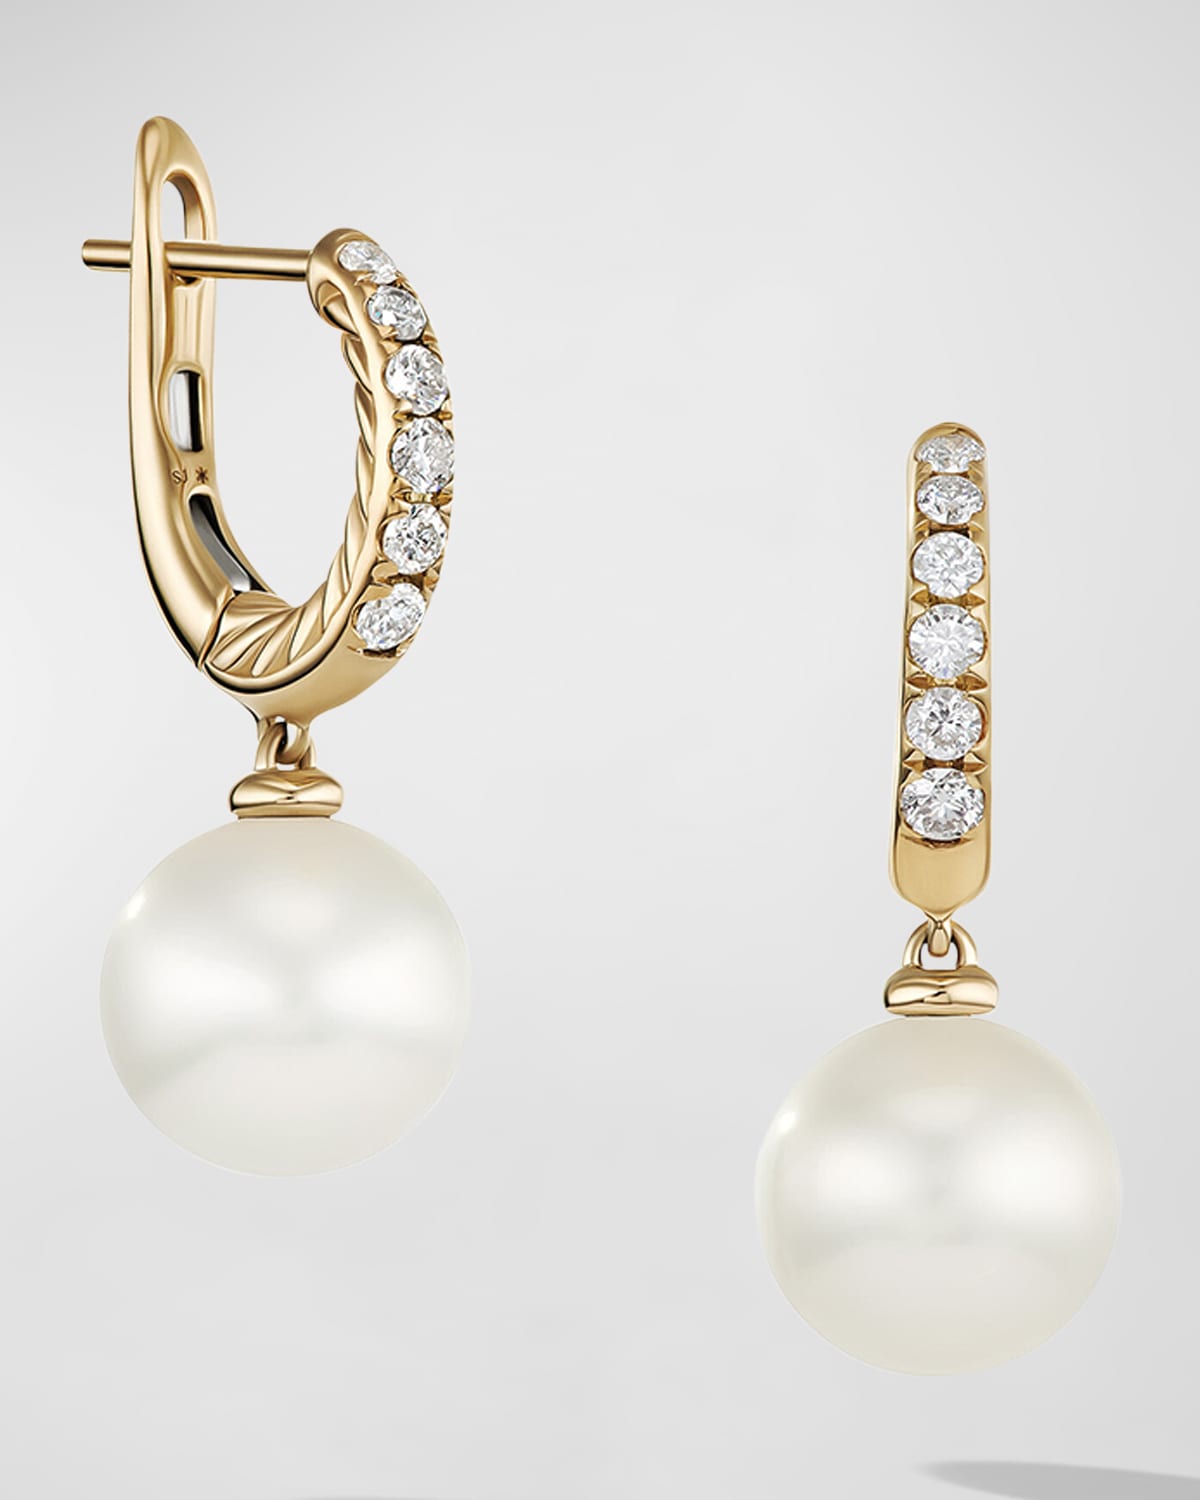 Shop David Yurman Pearl And Pave Drop Earrings With Diamonds In 18k Gold, 9mm, 0.61"l In 60 Multi-colored